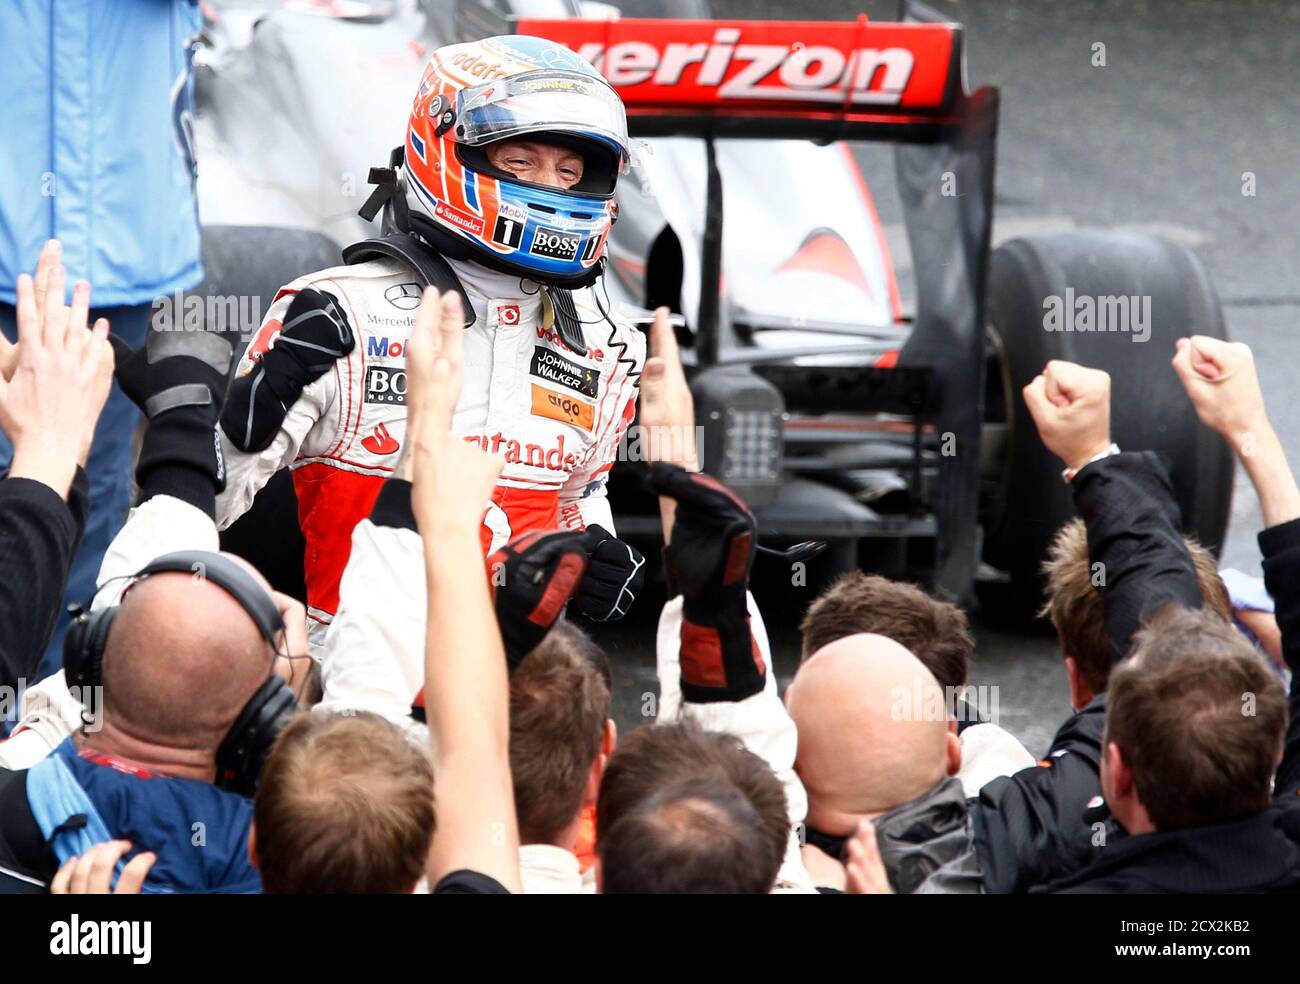 McLaren Formula One driver Jenson Button of Britain celebrates after winning the Canadian F1 Grand Prix at the Circuit Gilles Villeneuve in Montreal June 12, 2011.     REUTERS/Chris Wattie (CANADA  - Tags: SPORT MOTOR RACING) Stock Photo